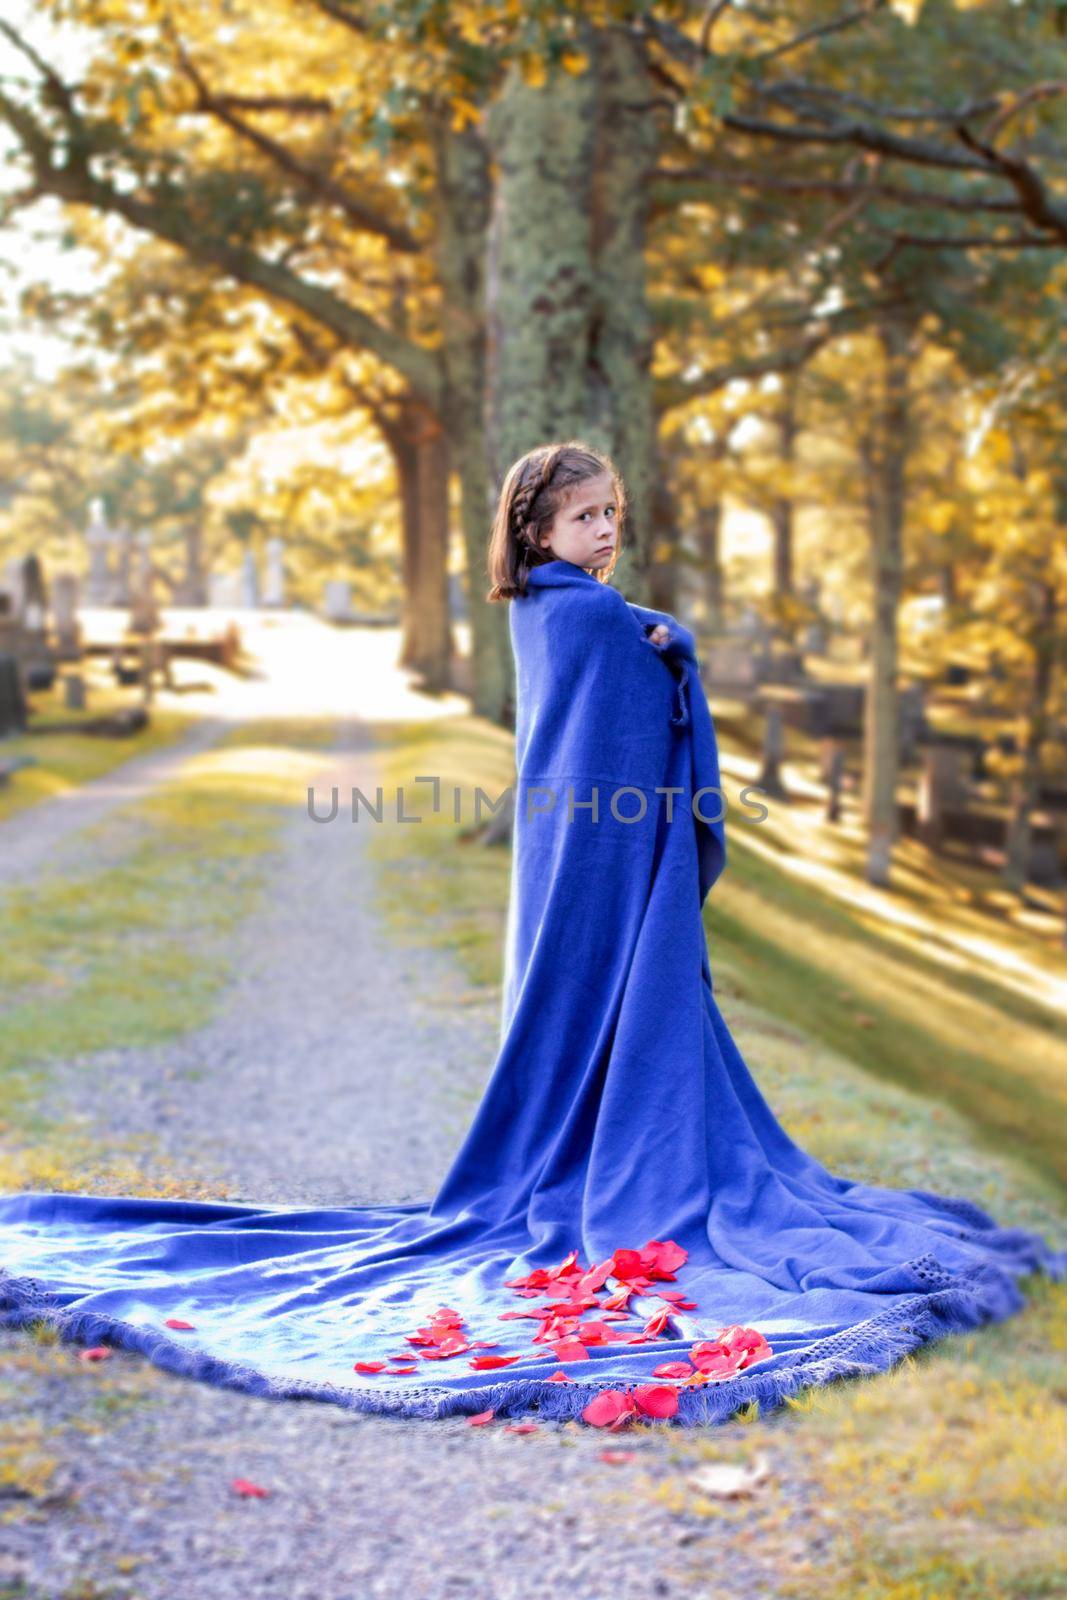 a young girl wrapped in a blanket with roses looks mournful in the cemetery 